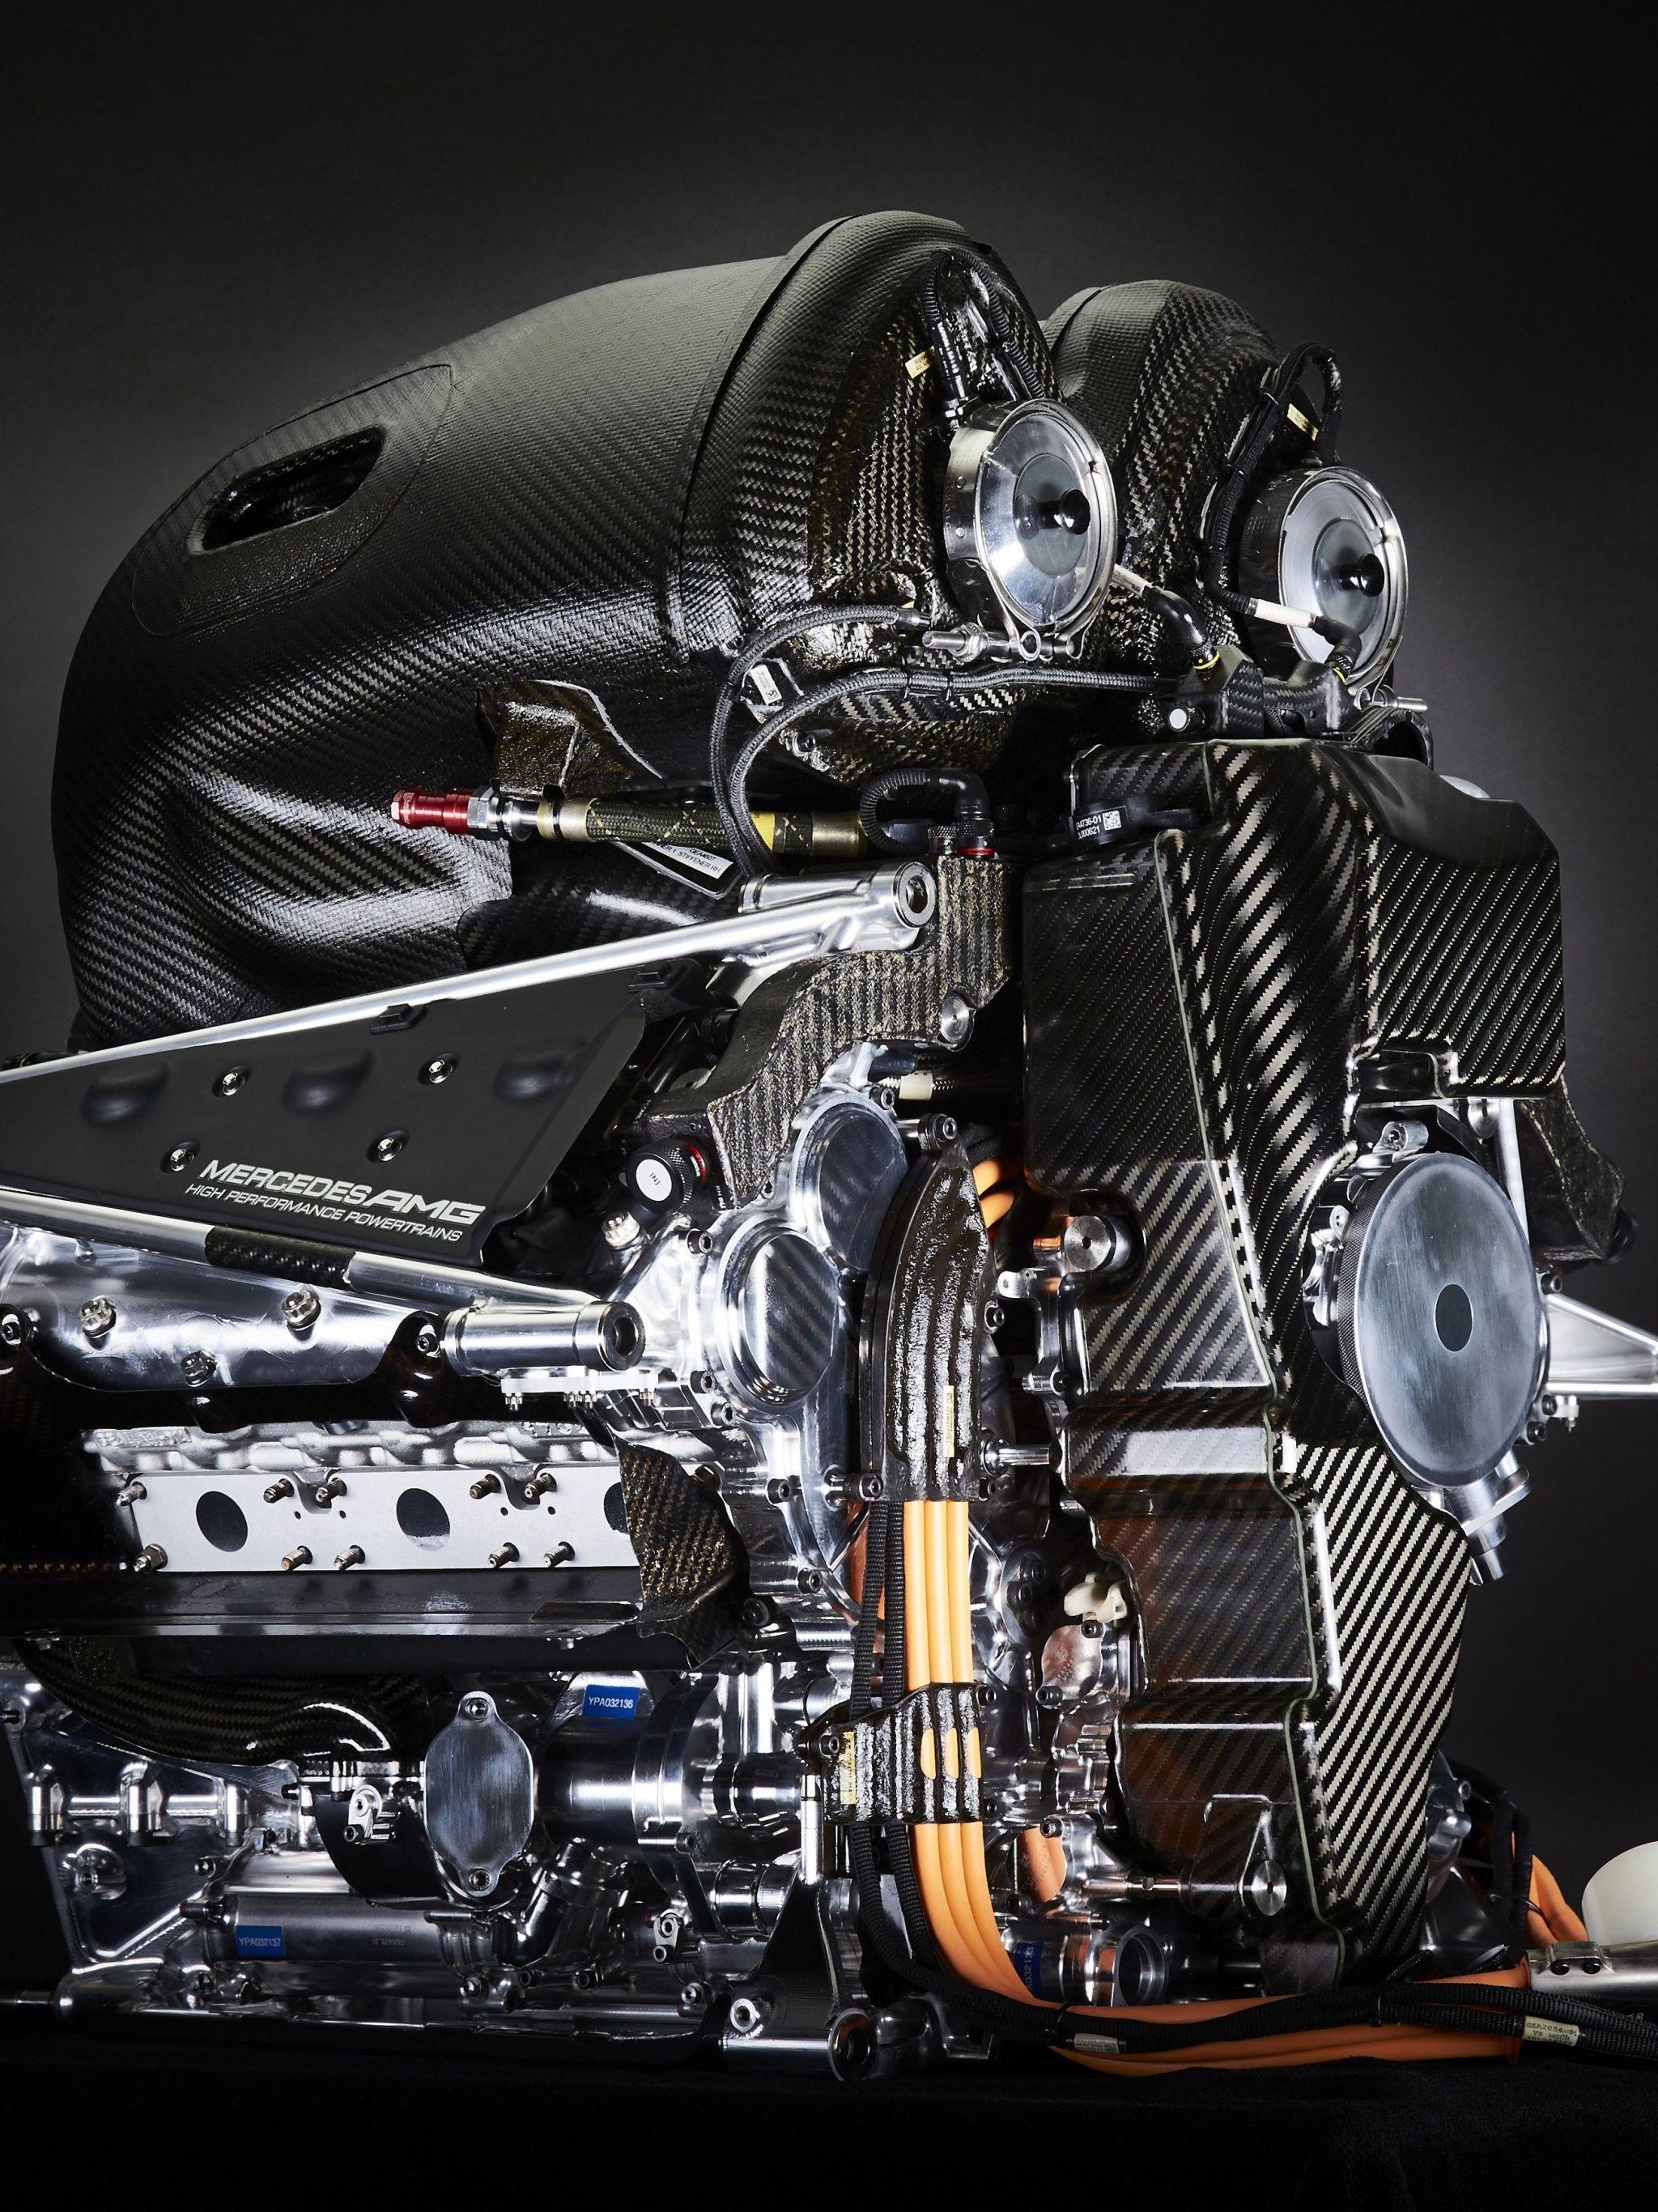  Mercedes  Engine  Wallpapers  Top Free Mercedes  Engine  